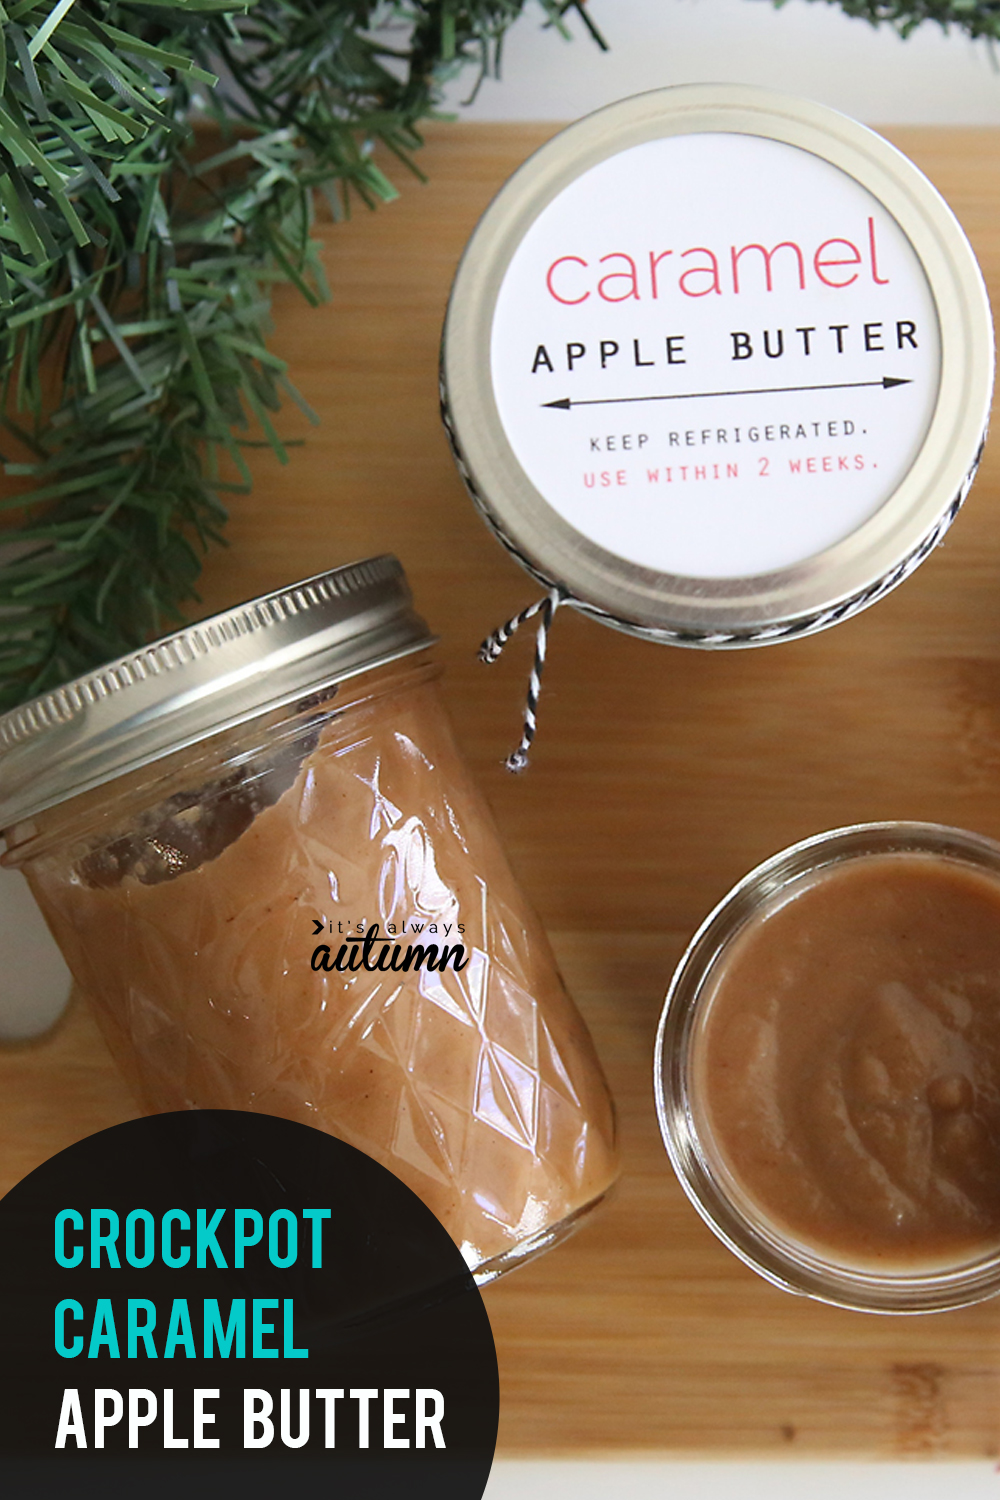 Cute Apple Butter Canning Labels